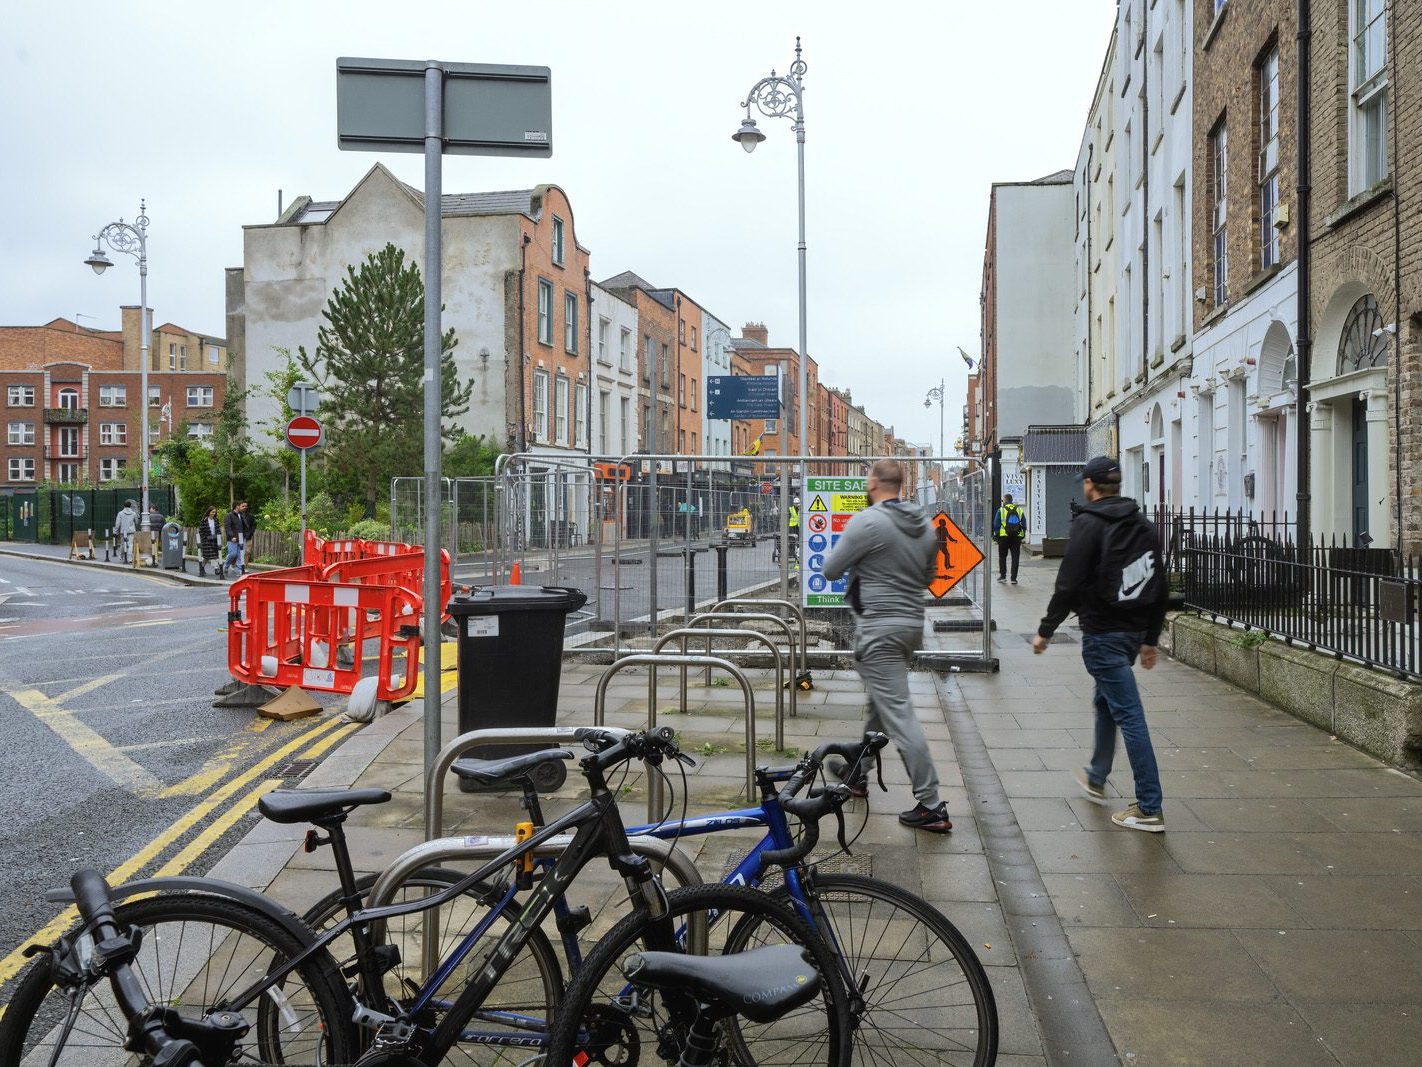 CAPEL STREET ON A DULL WET DAY [INTERIM CAPEL STREET IMPROVEMENT WORKS ARE NOW ONGOING] 001